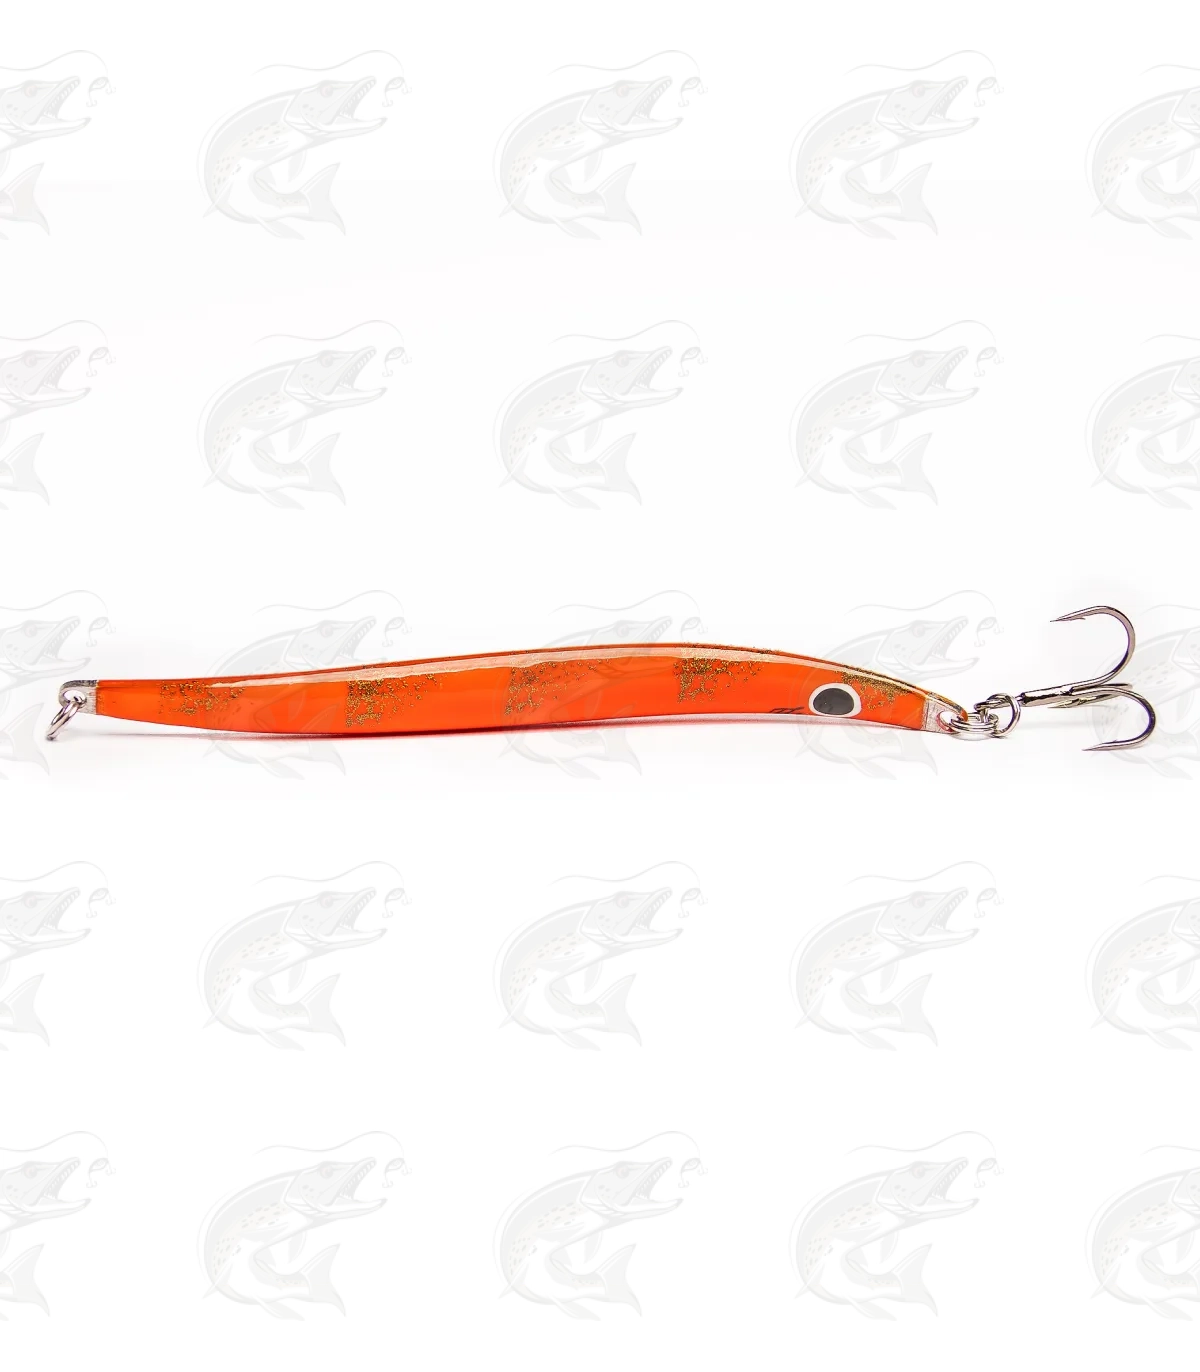 T.Lures Hybrid Small Tobias seatrout lure